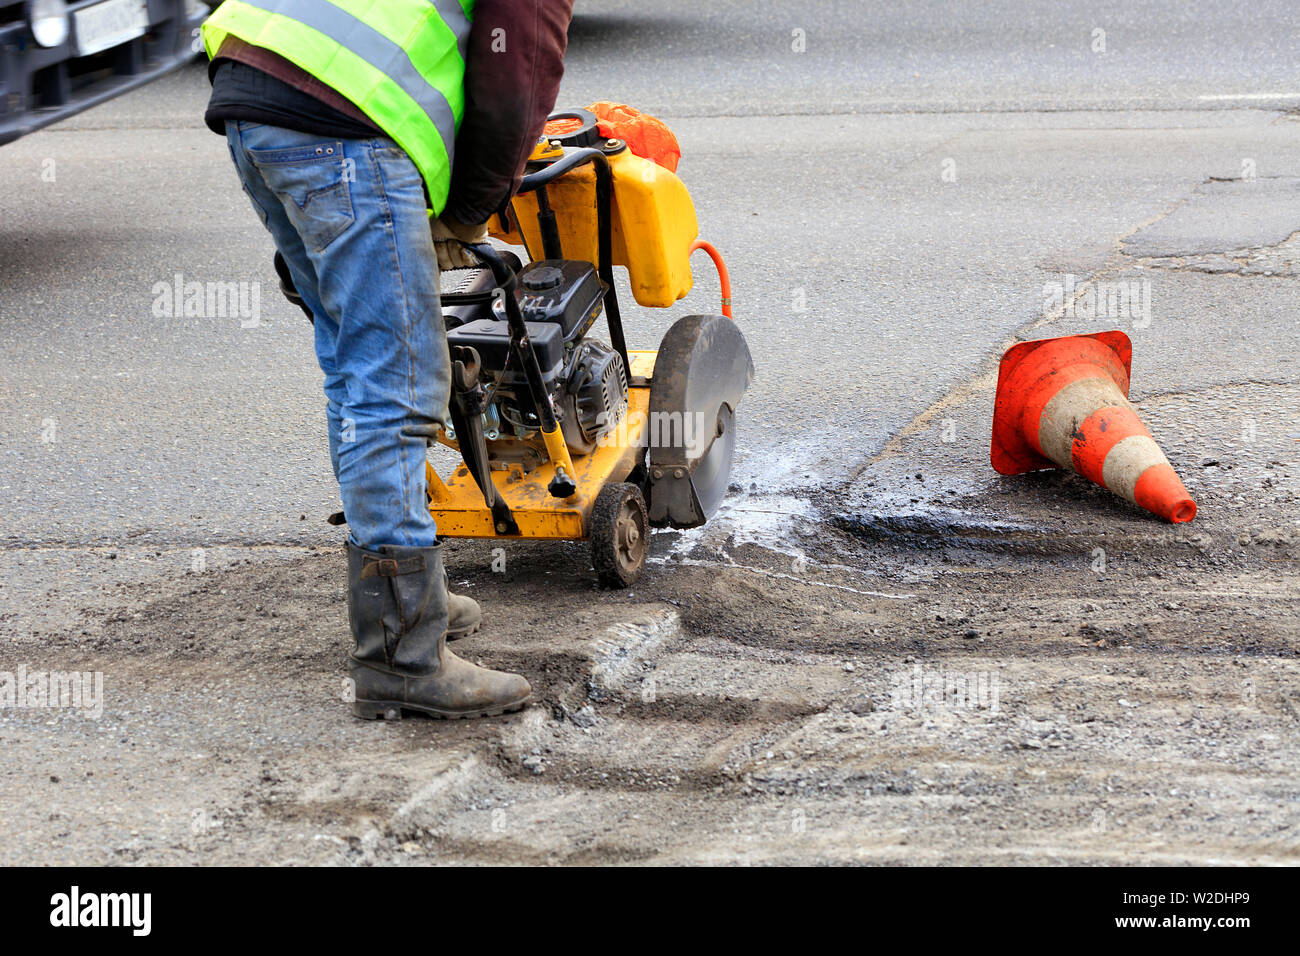 An employee of the road maintenance service removes old asphalt with a gasoline carver during repairs on the carriageway. Stock Photo